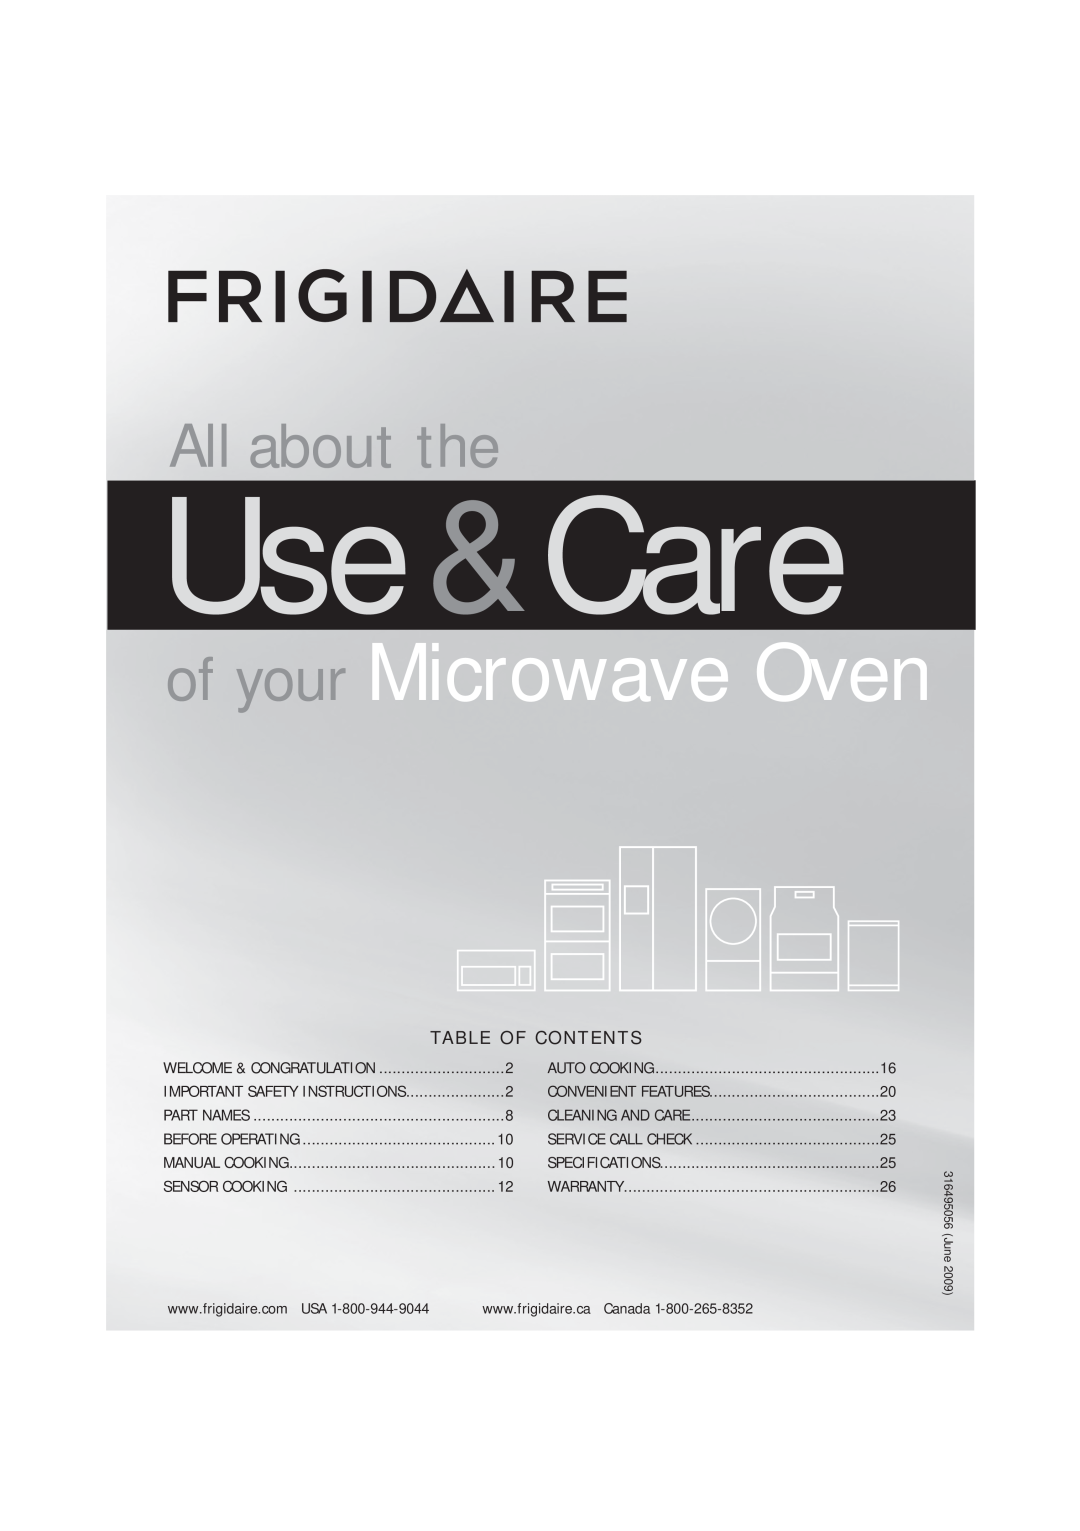 Frigidaire FGMV173KQ, FGMV174KF, FGMV173KW important safety instructions Use &Care, of your Microwave Oven, All about the 